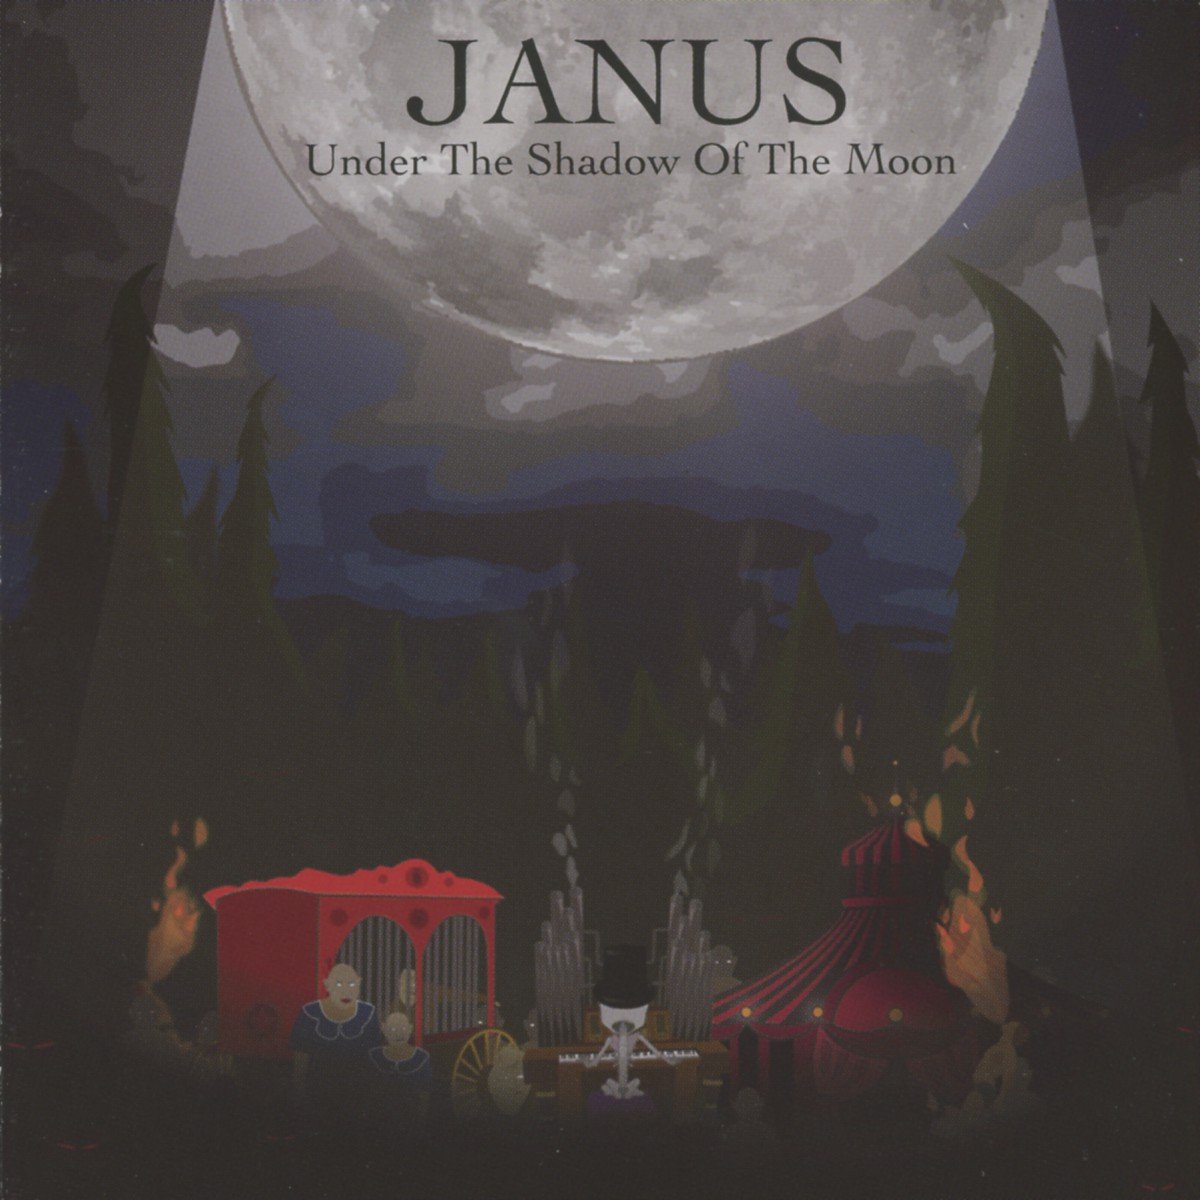 Beneath the moon. Janus under the Shadow of the Moon. Under the Shadow of the Moon. Janus 20013-under the Shadow of the Moon. Aeternus under the Moon.